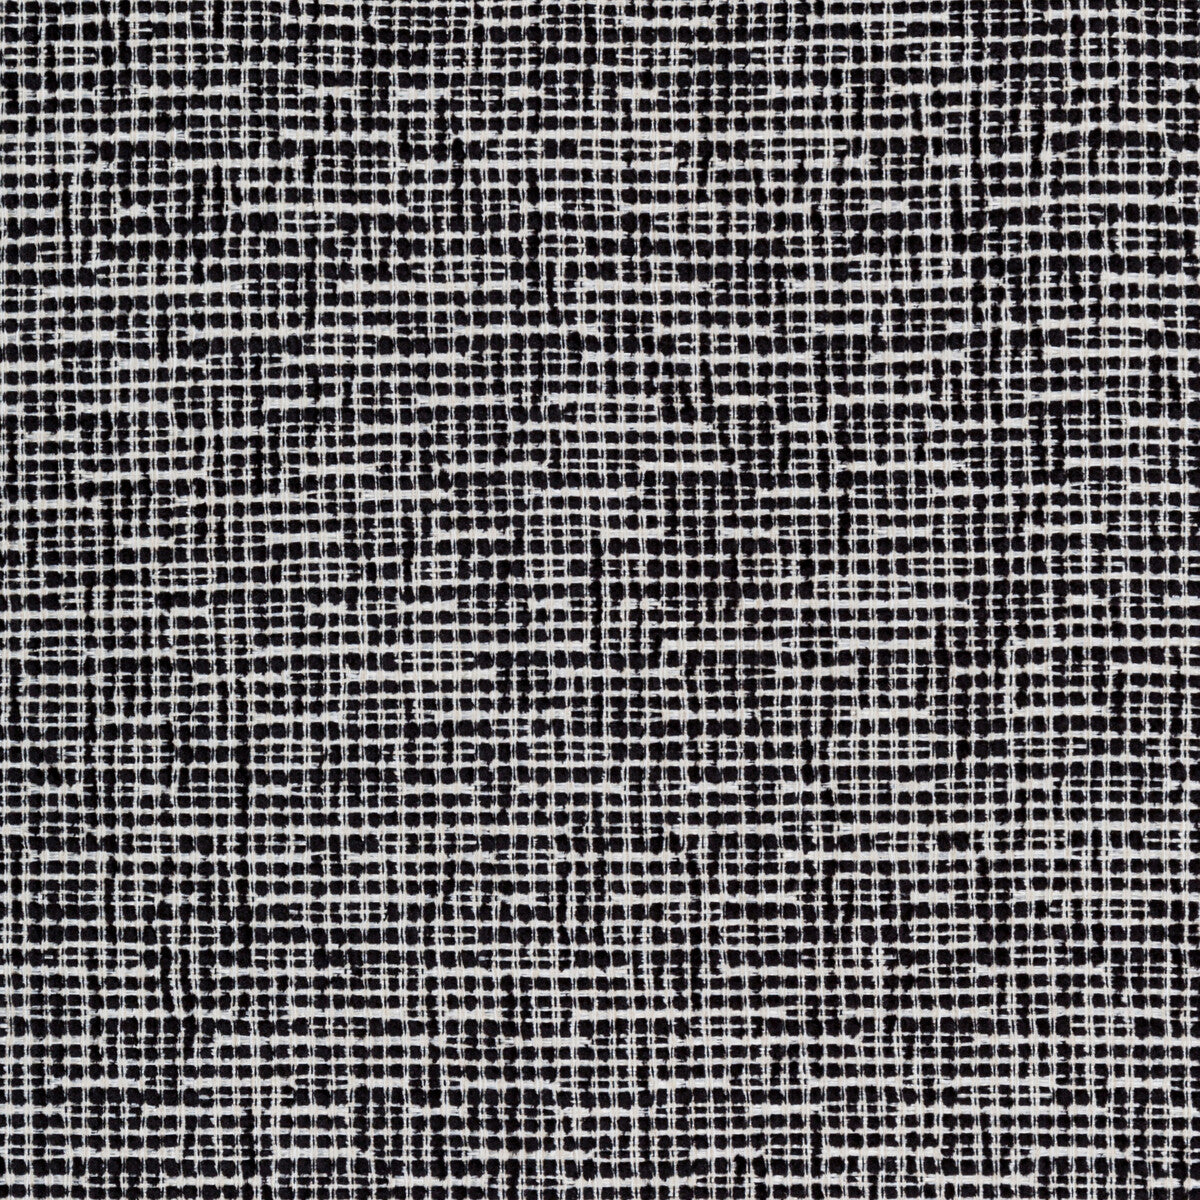 Kravet Smart fabric in 35968-81 color - pattern 35968.81.0 - by Kravet Smart in the Performance Crypton Home collection